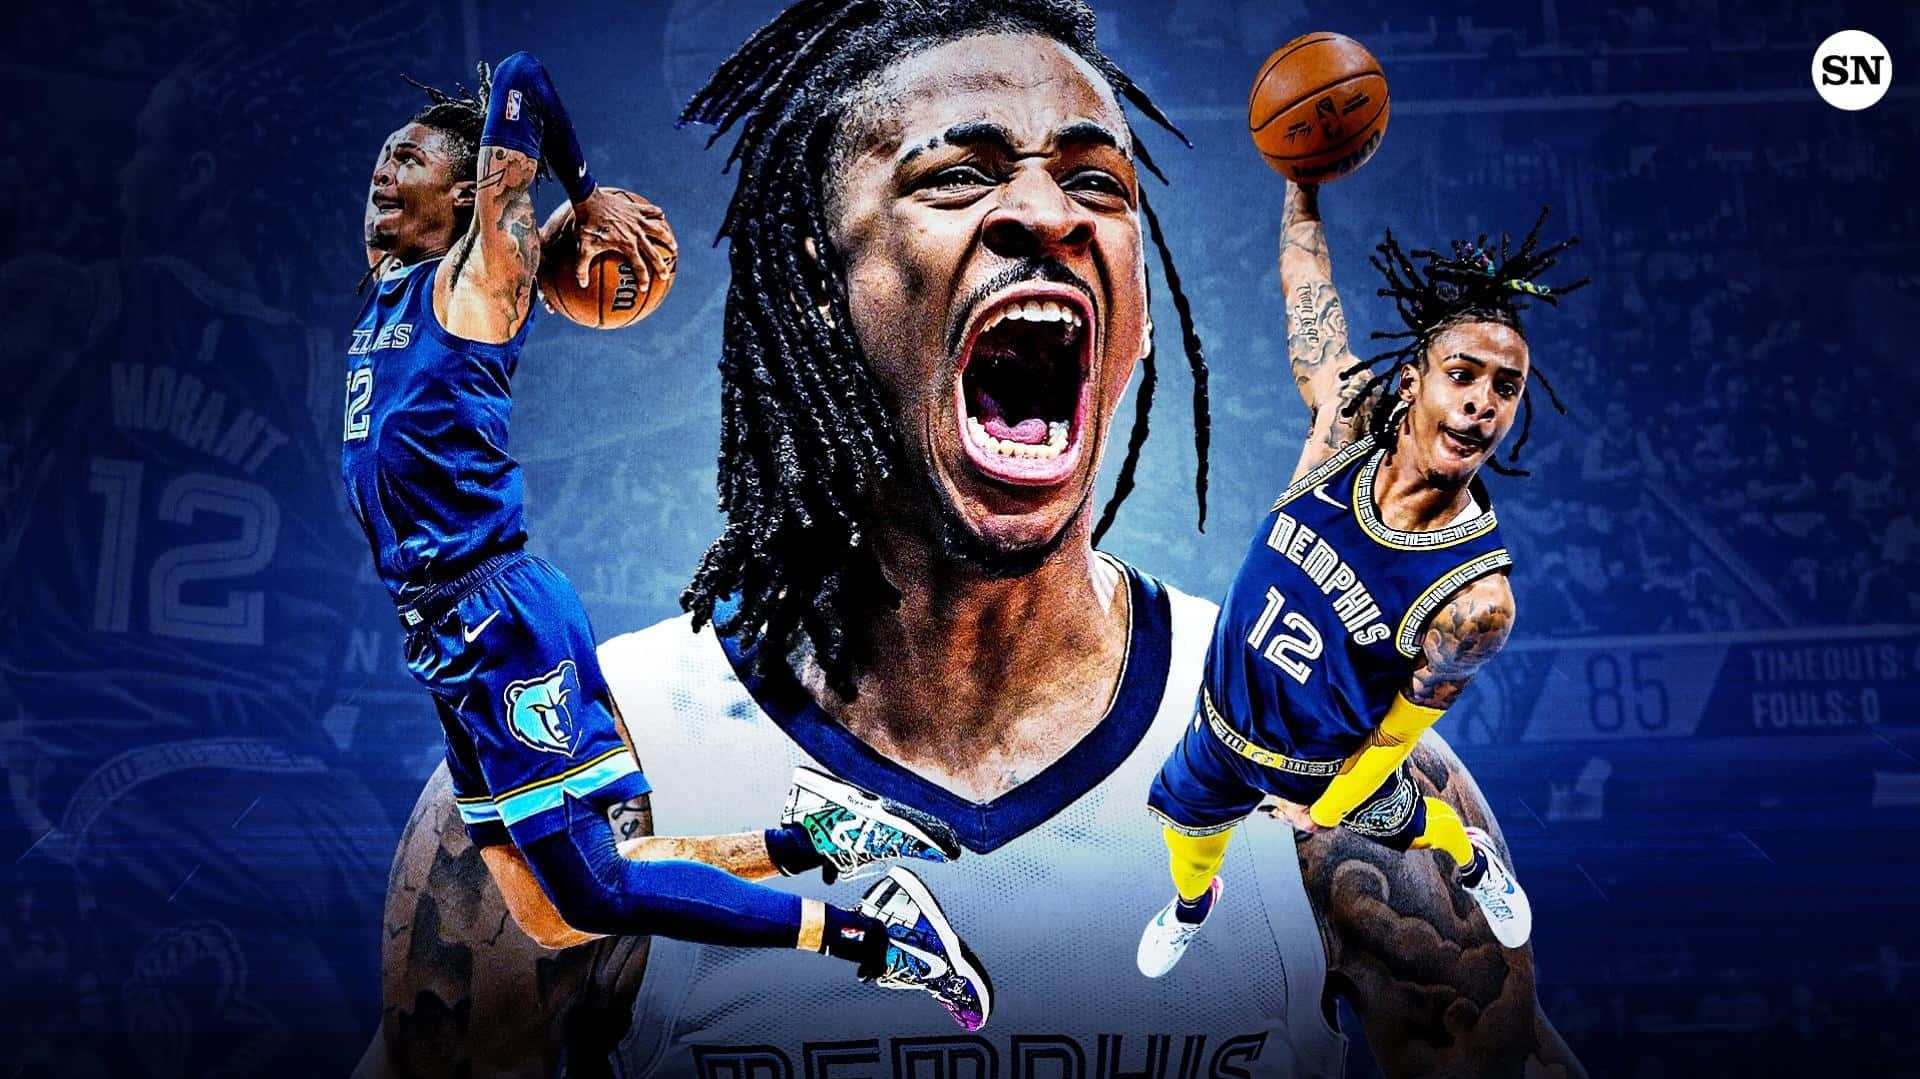 Download Nba Players With Dreadlocks And A Basketball Player